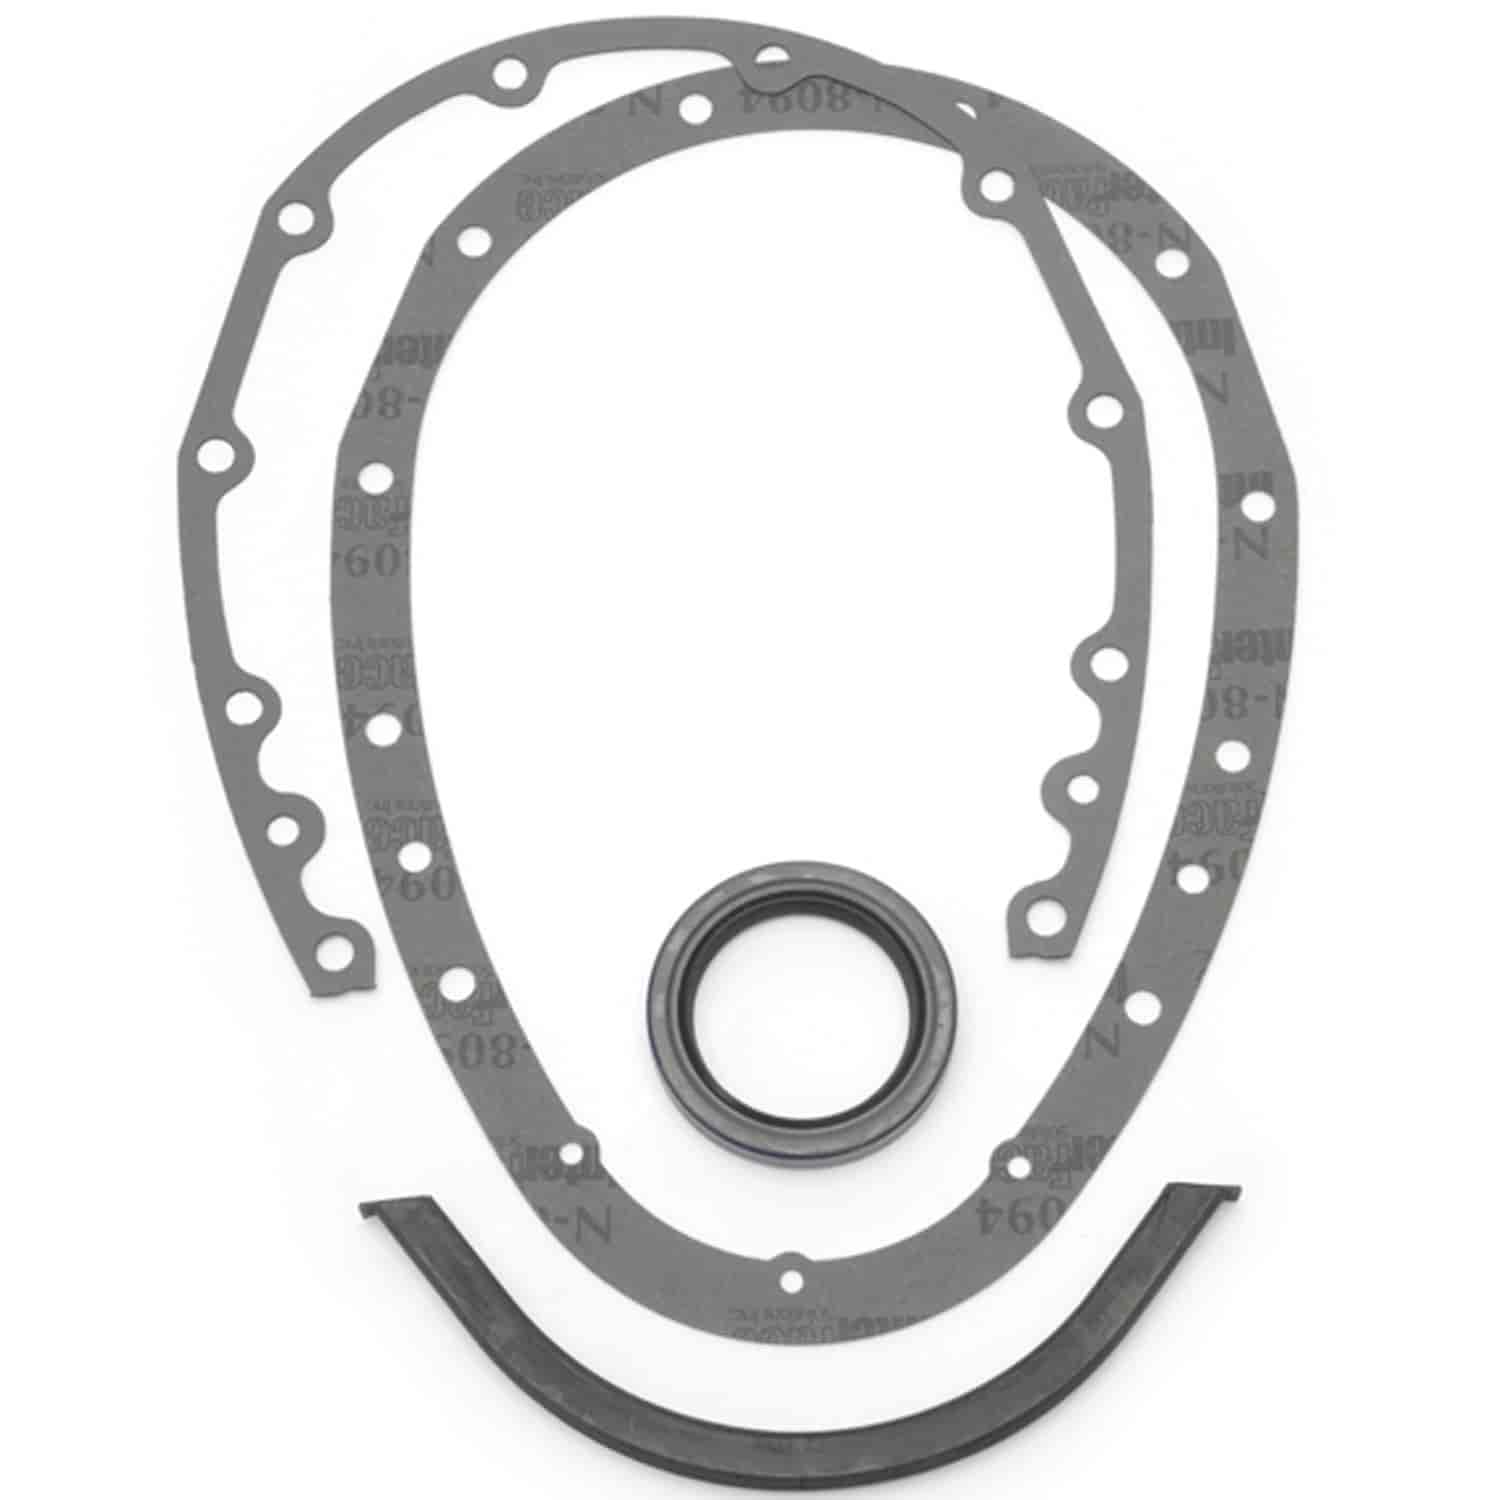 Replacement Gasket For Smal Block Chevy Timing Cover: 350-4242